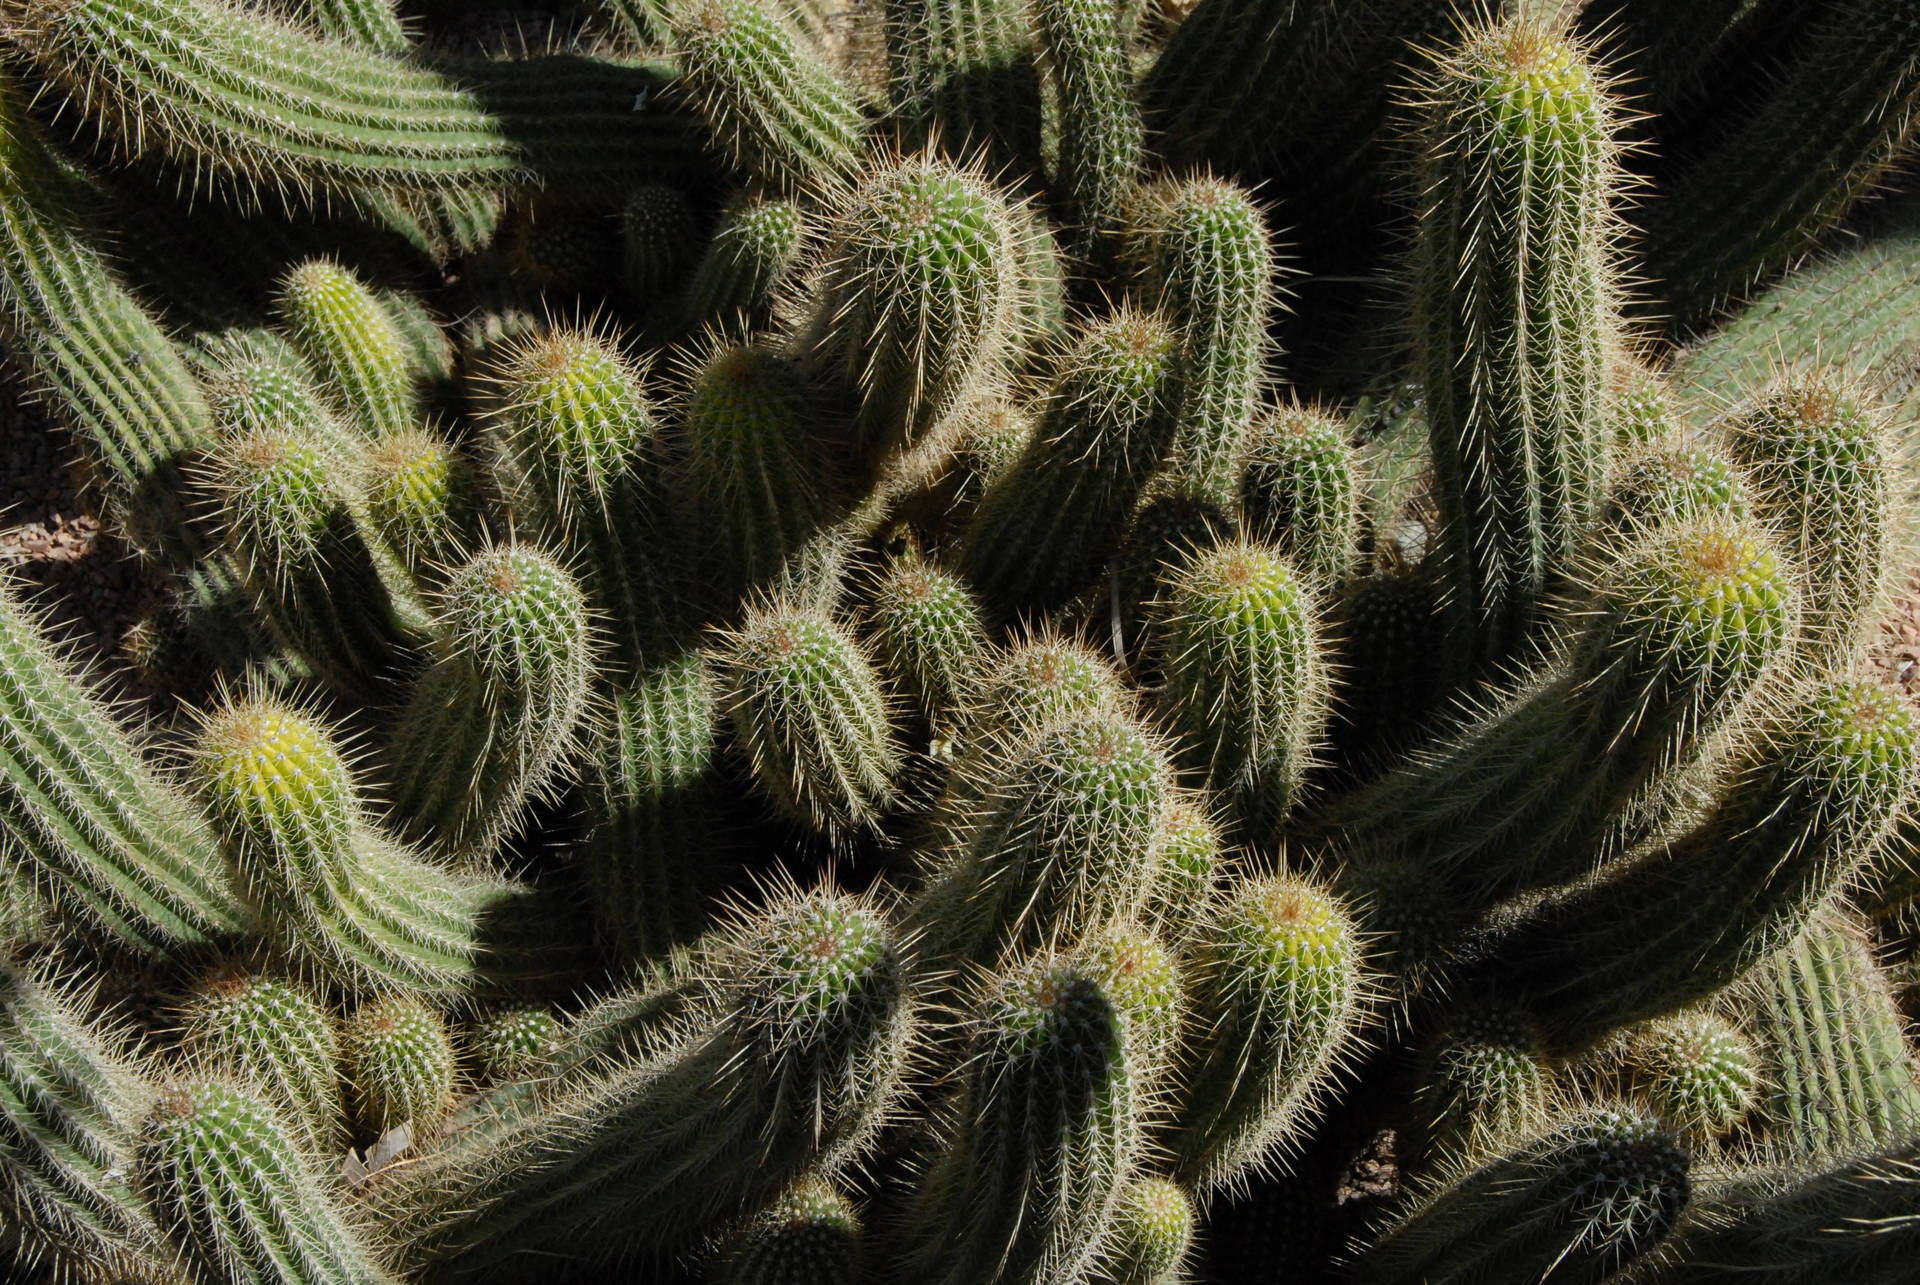 Cactus 3872X2592 Wallpaper and Background Image